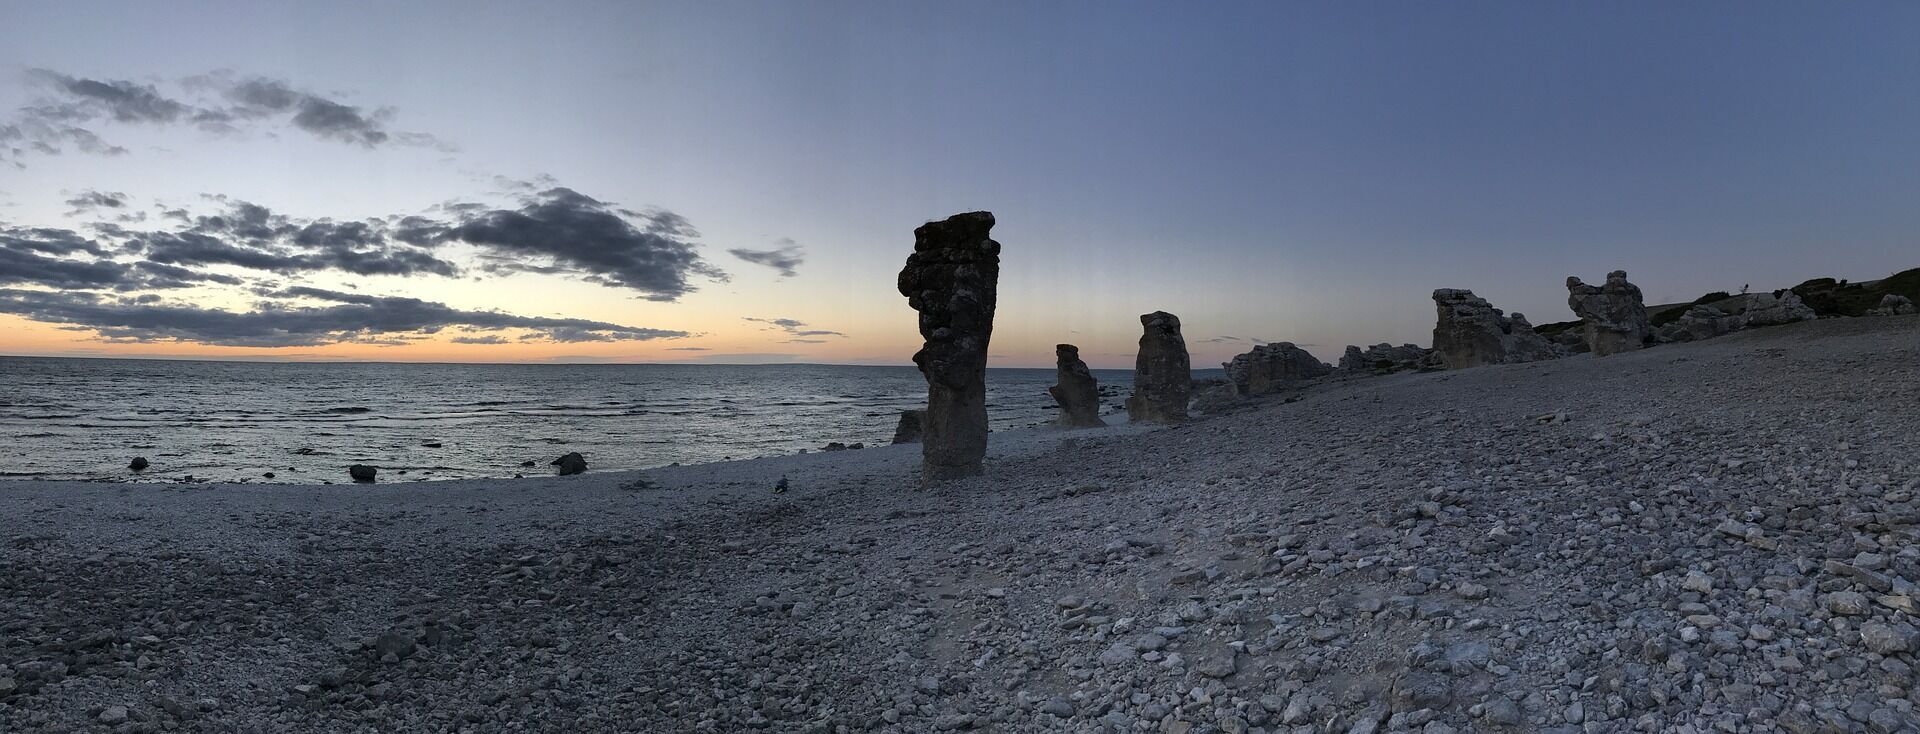 <span style="font-weight: 400;">A panoramic view of a rocky shoreline with distinctive sea stack formations under a sunset sky on Gotland, Sweden</span>